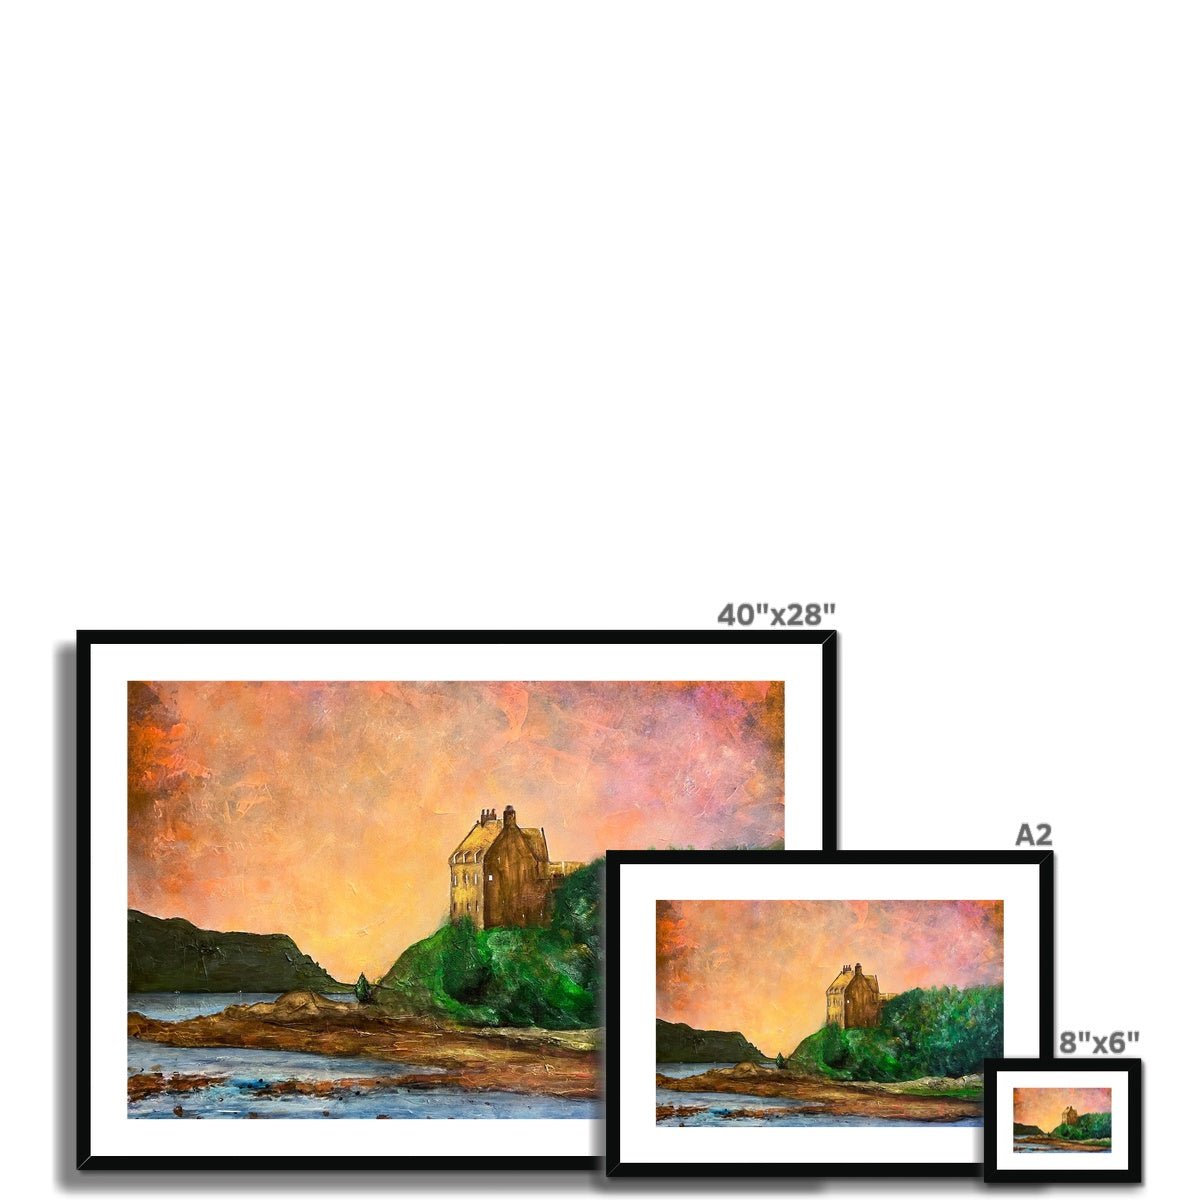 Duntrune Castle Painting | Framed & Mounted Prints From Scotland-Framed & Mounted Prints-Scottish Castles Art Gallery-Paintings, Prints, Homeware, Art Gifts From Scotland By Scottish Artist Kevin Hunter